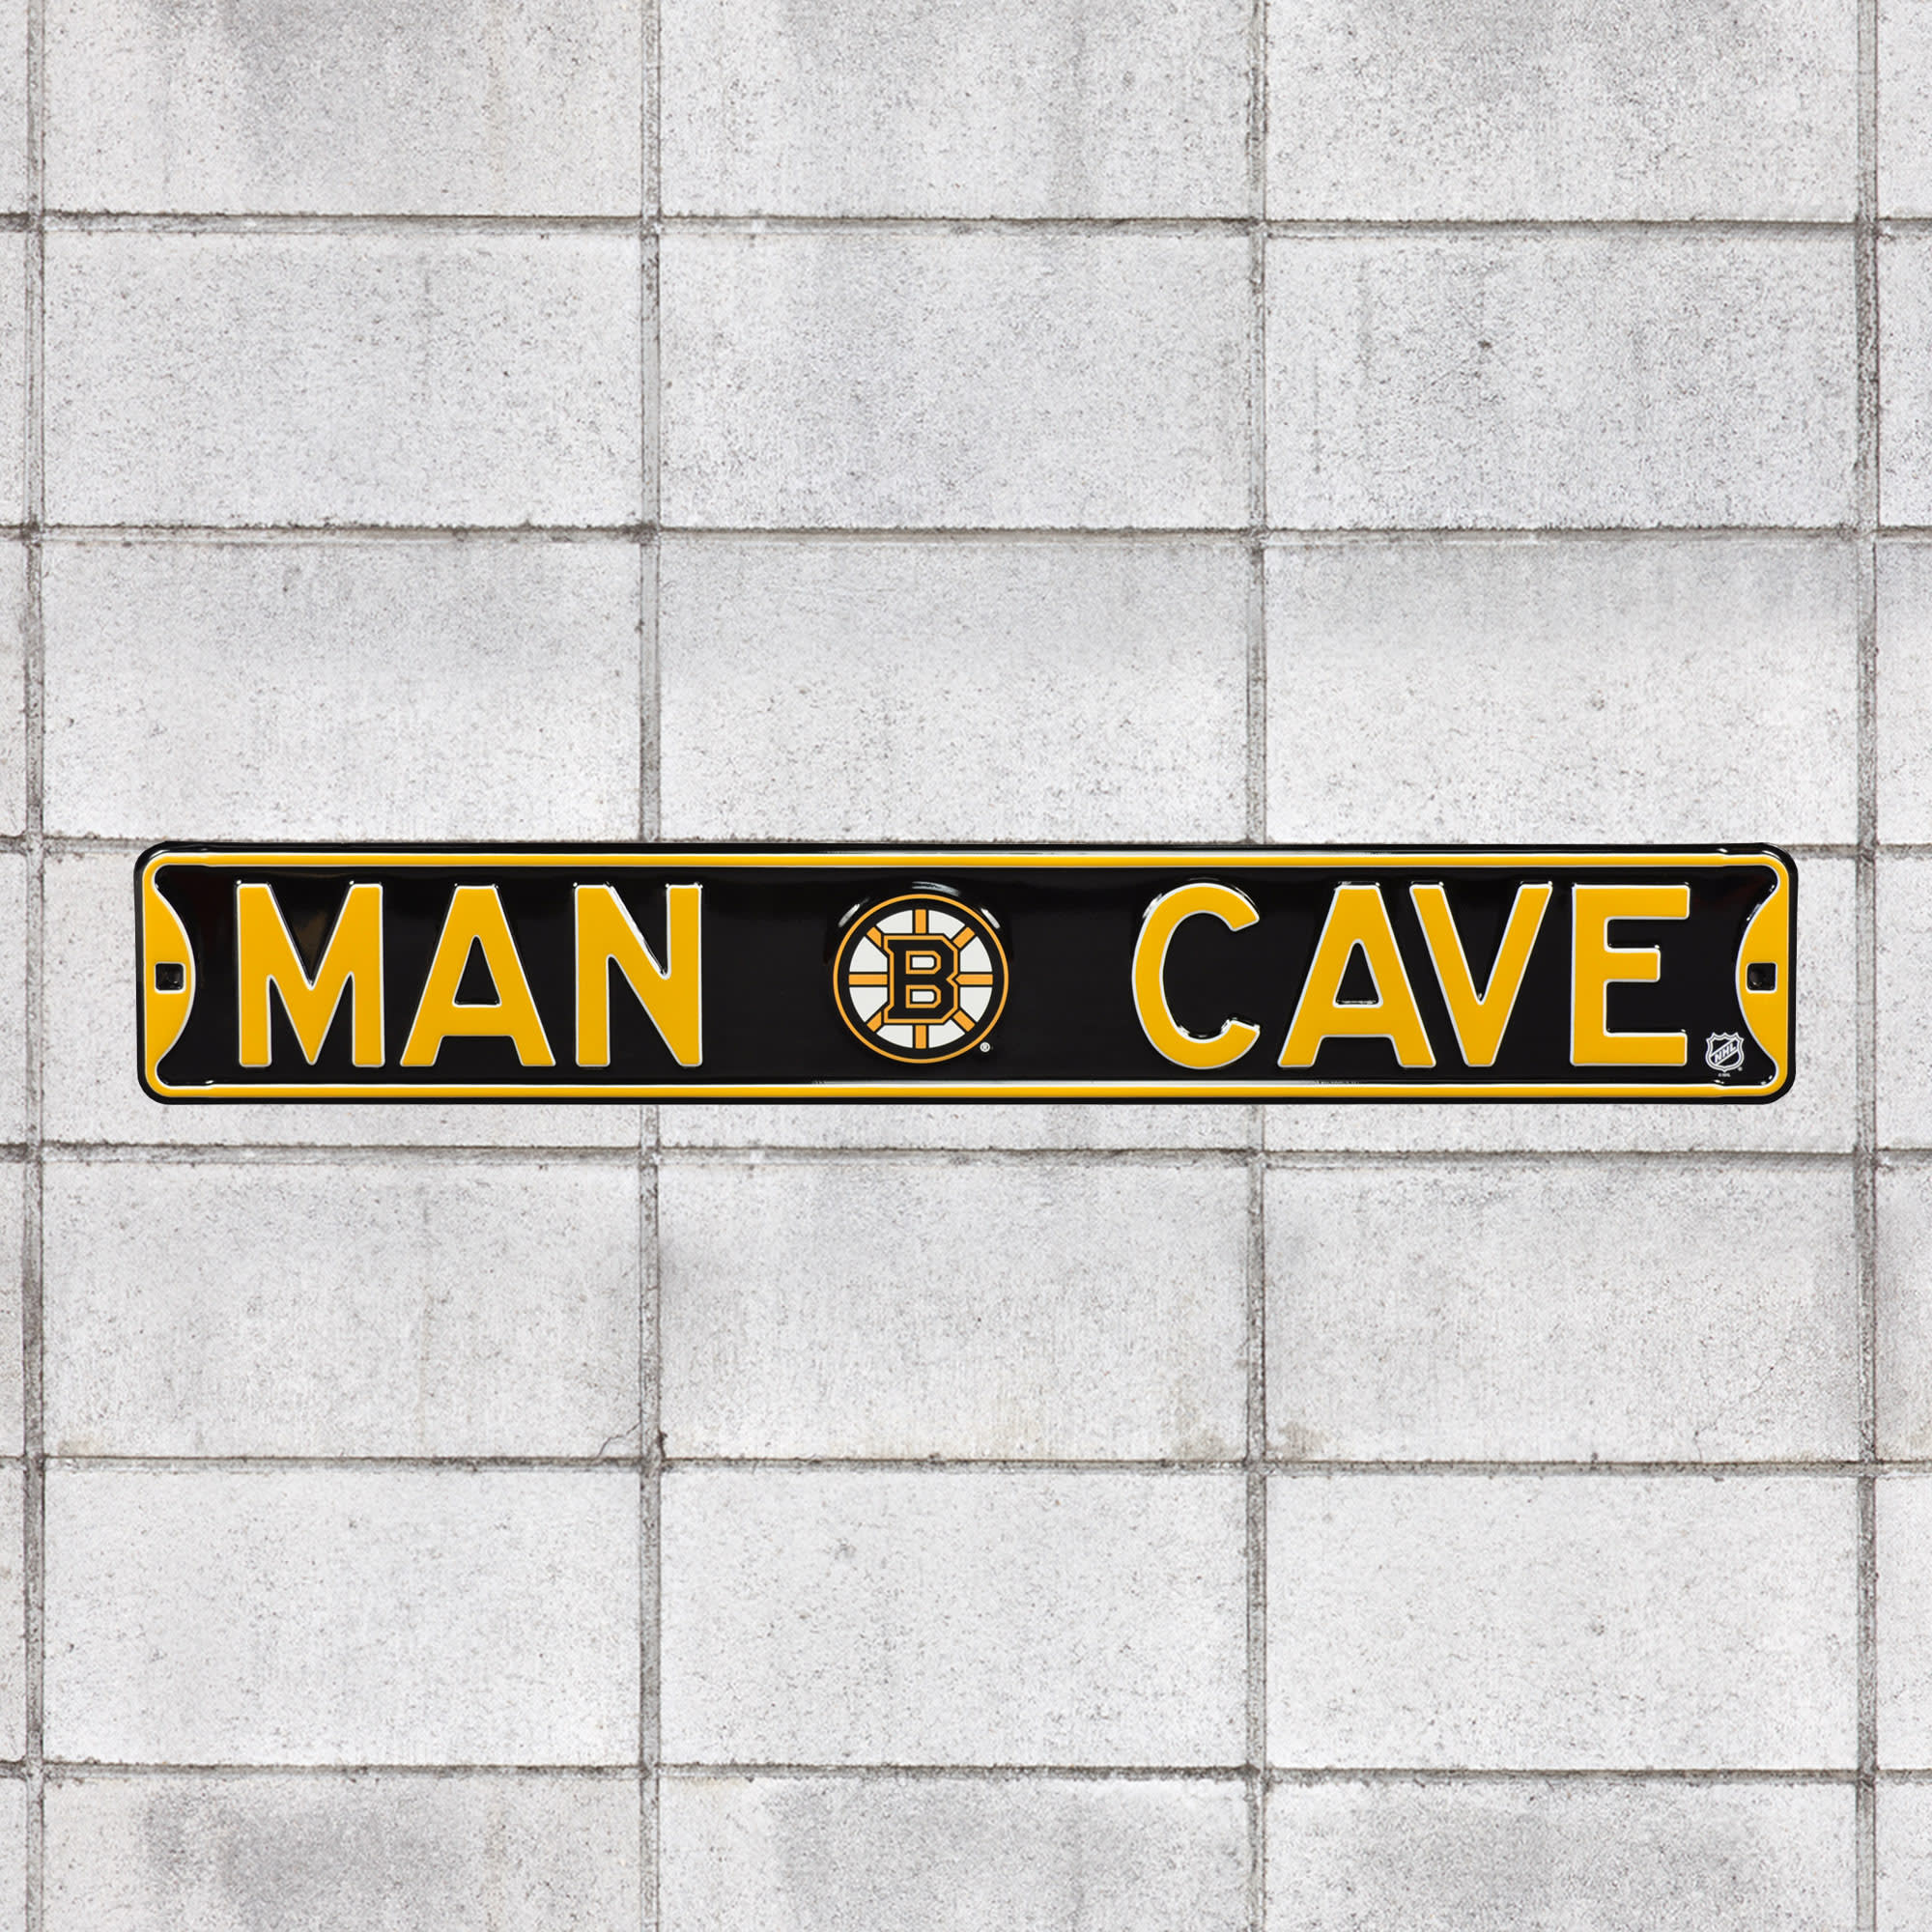 Boston Bruins: Man Cave - Officially Licensed NHL Metal Street Sign 36.0"W x 6.0"H by Fathead | 100% Steel